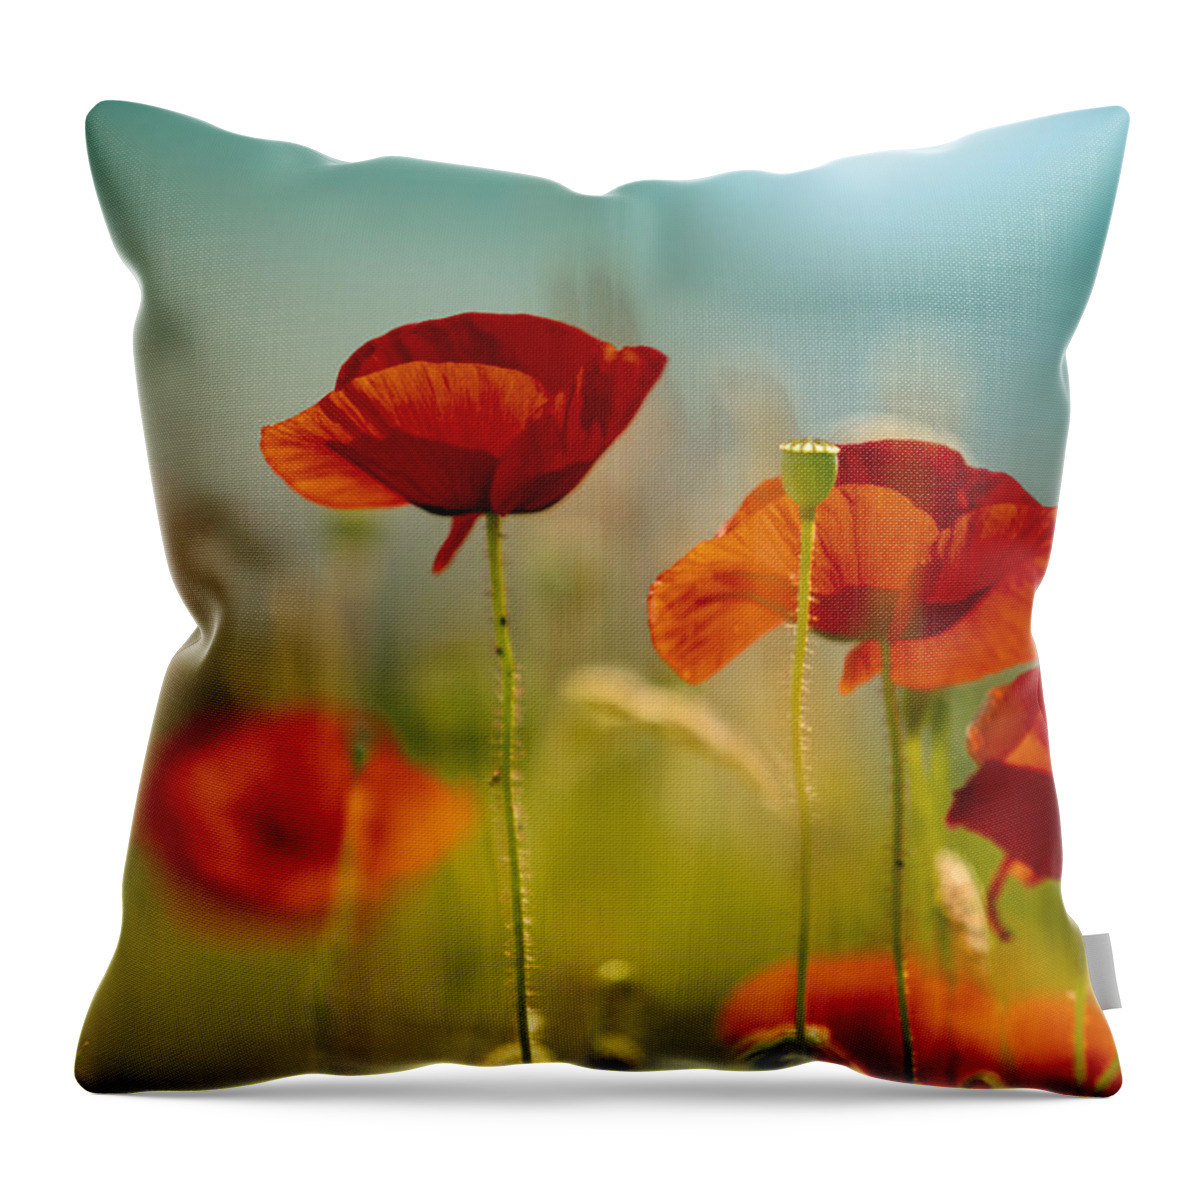 Poppy Throw Pillow featuring the photograph Summer Poppy by Nailia Schwarz